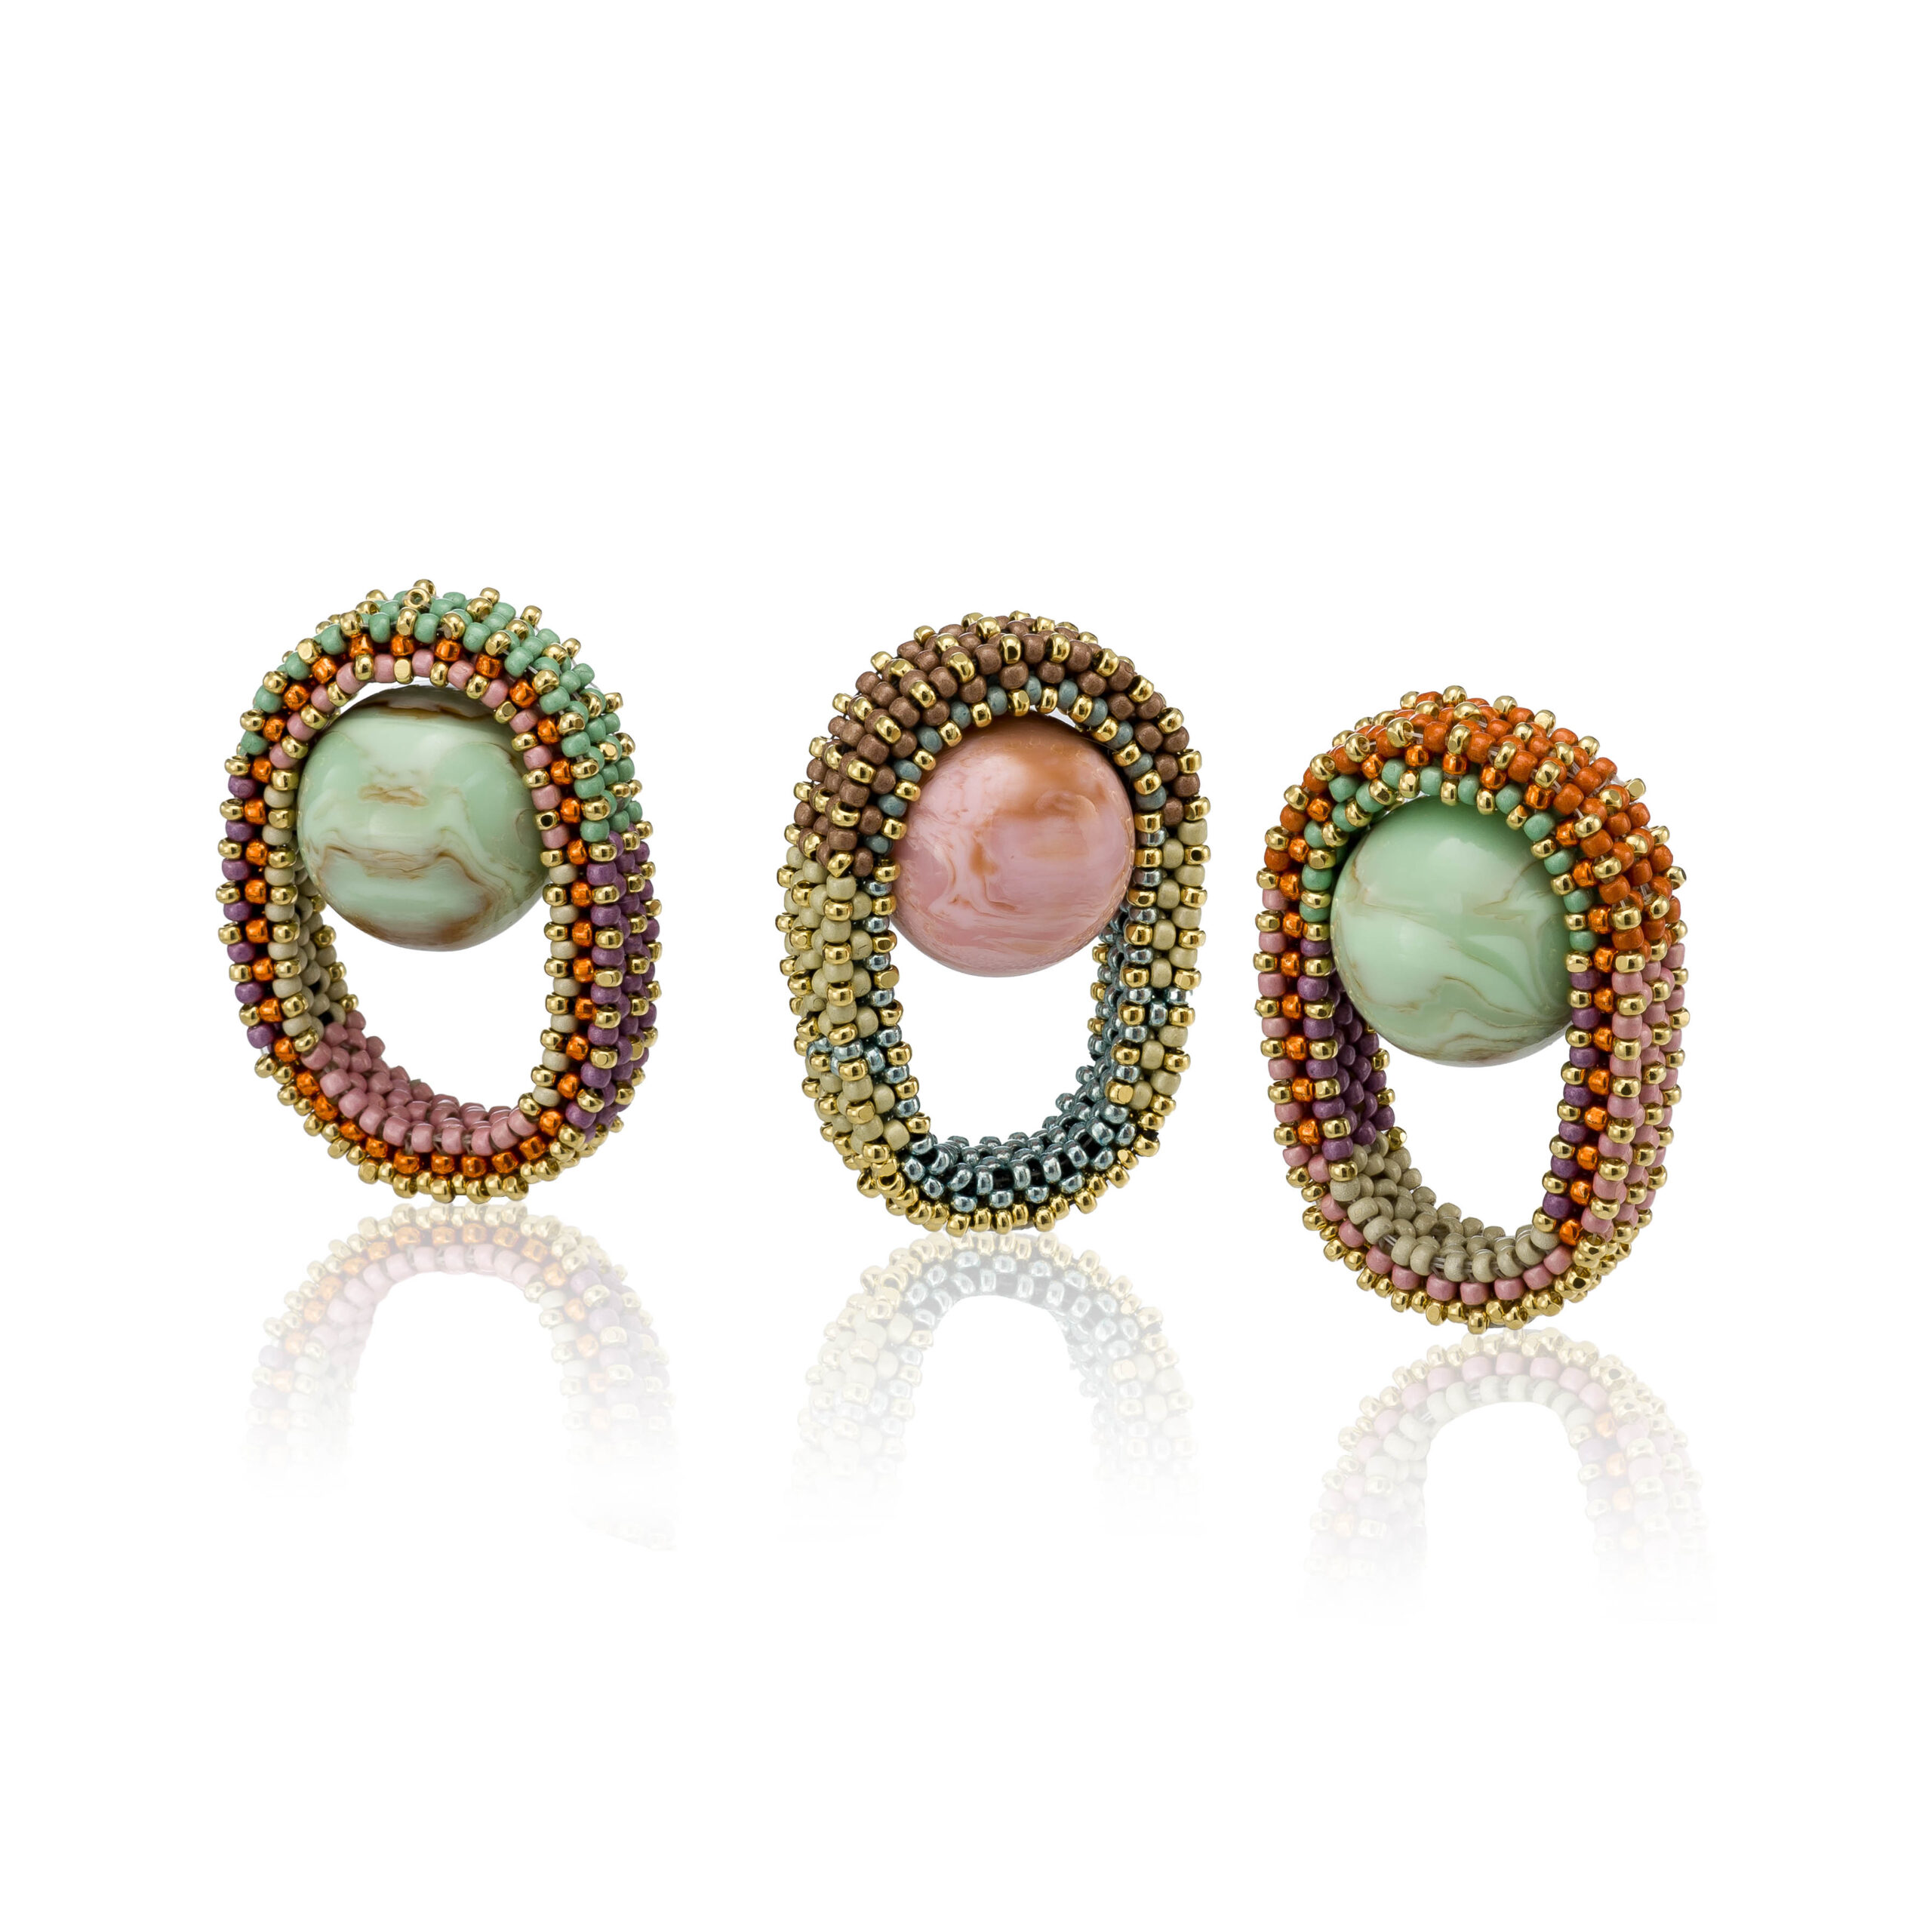 Pod Rings! Handmade Beaded Jewelry with Vintage Marble Beads